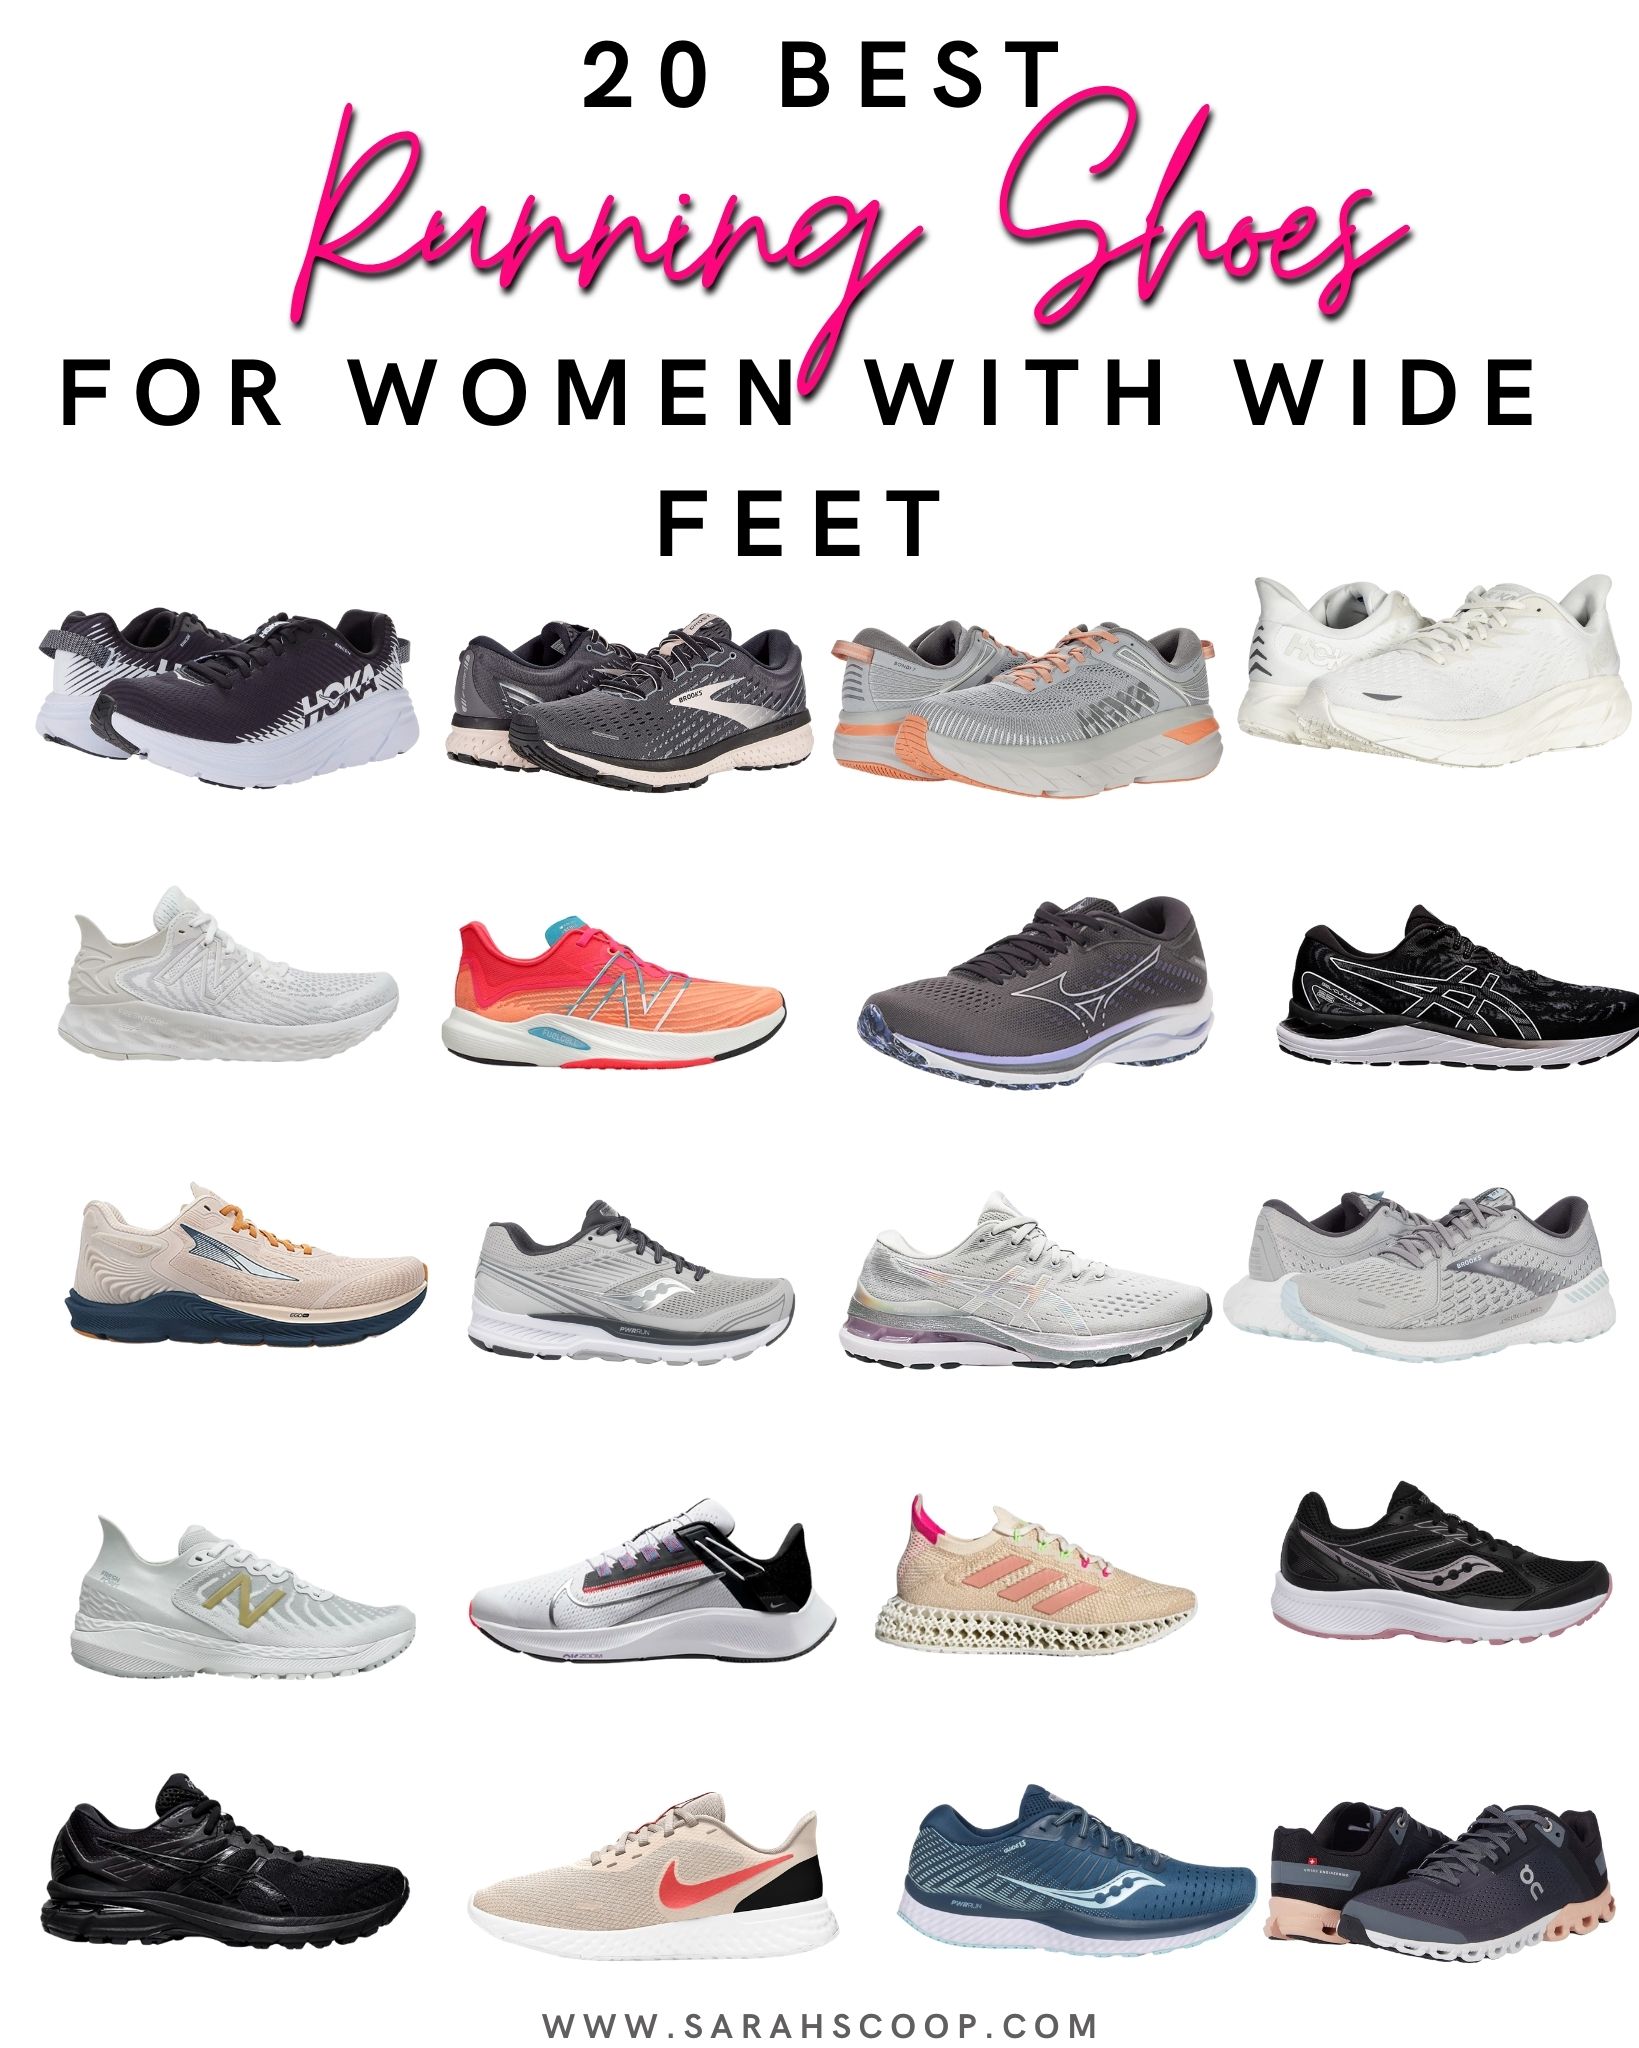 The 35 Best Running Shoes for Women 